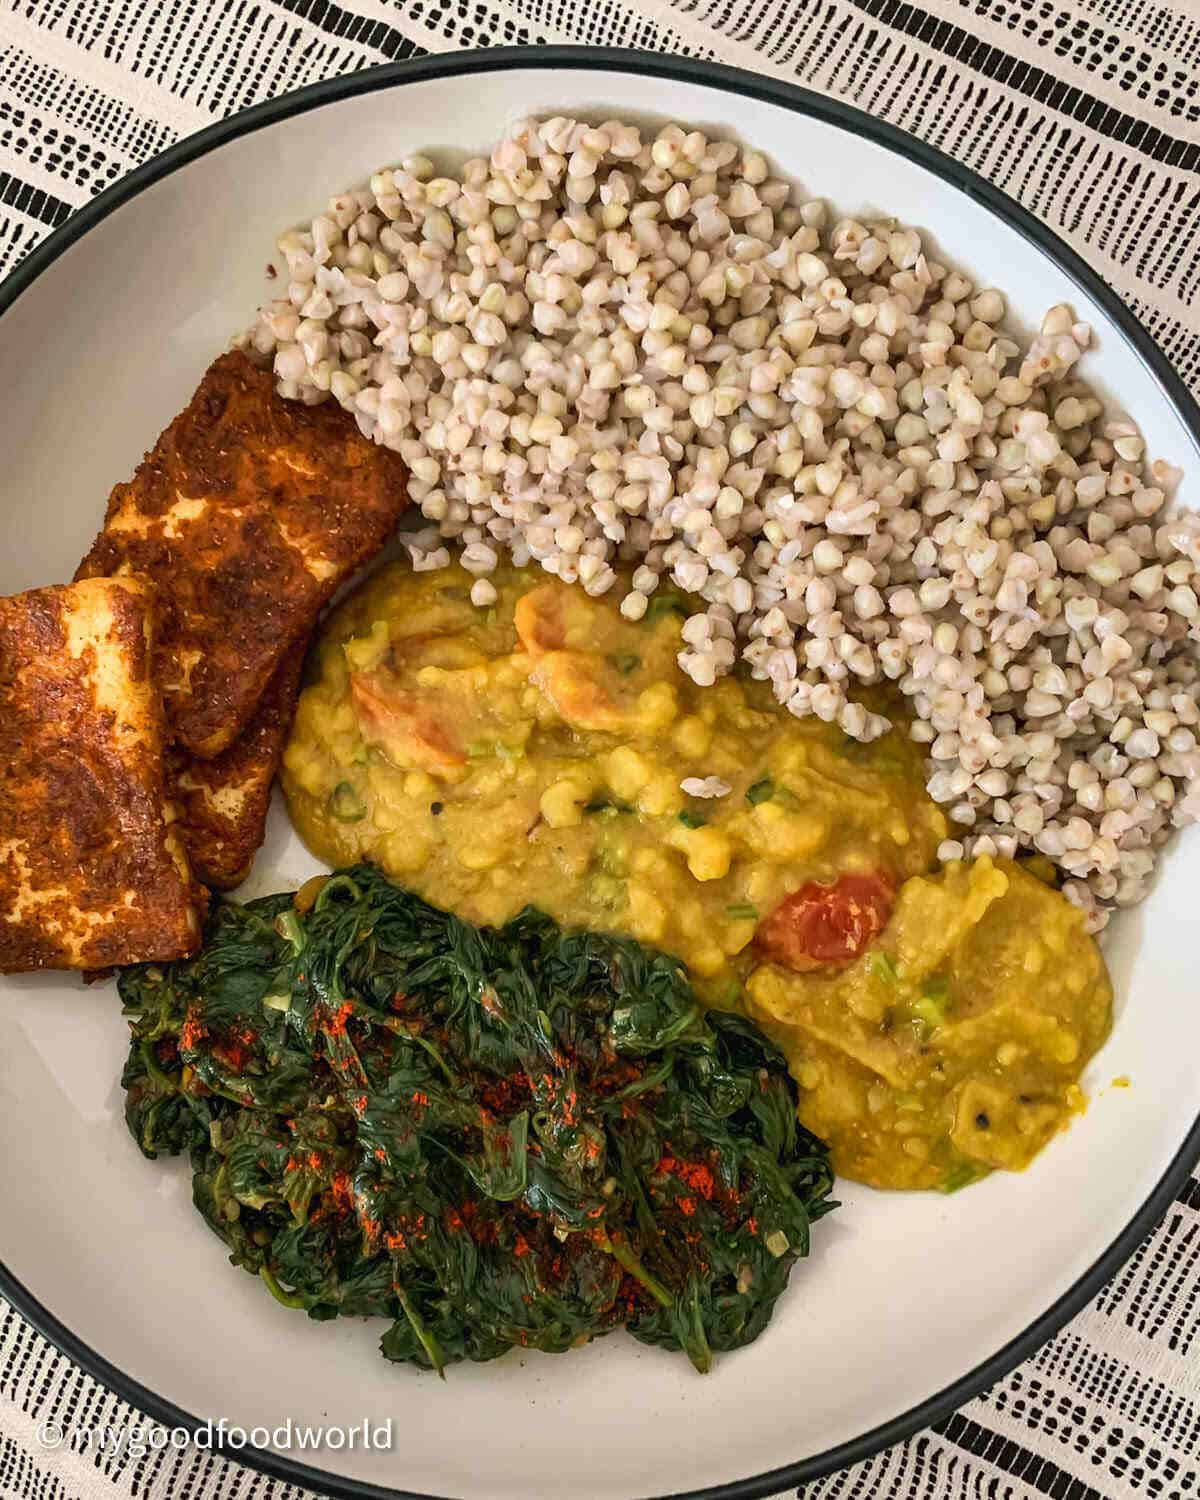 Cooked buckwheat groats served with lentils, greens and pan cooked paneer in a while bowl.